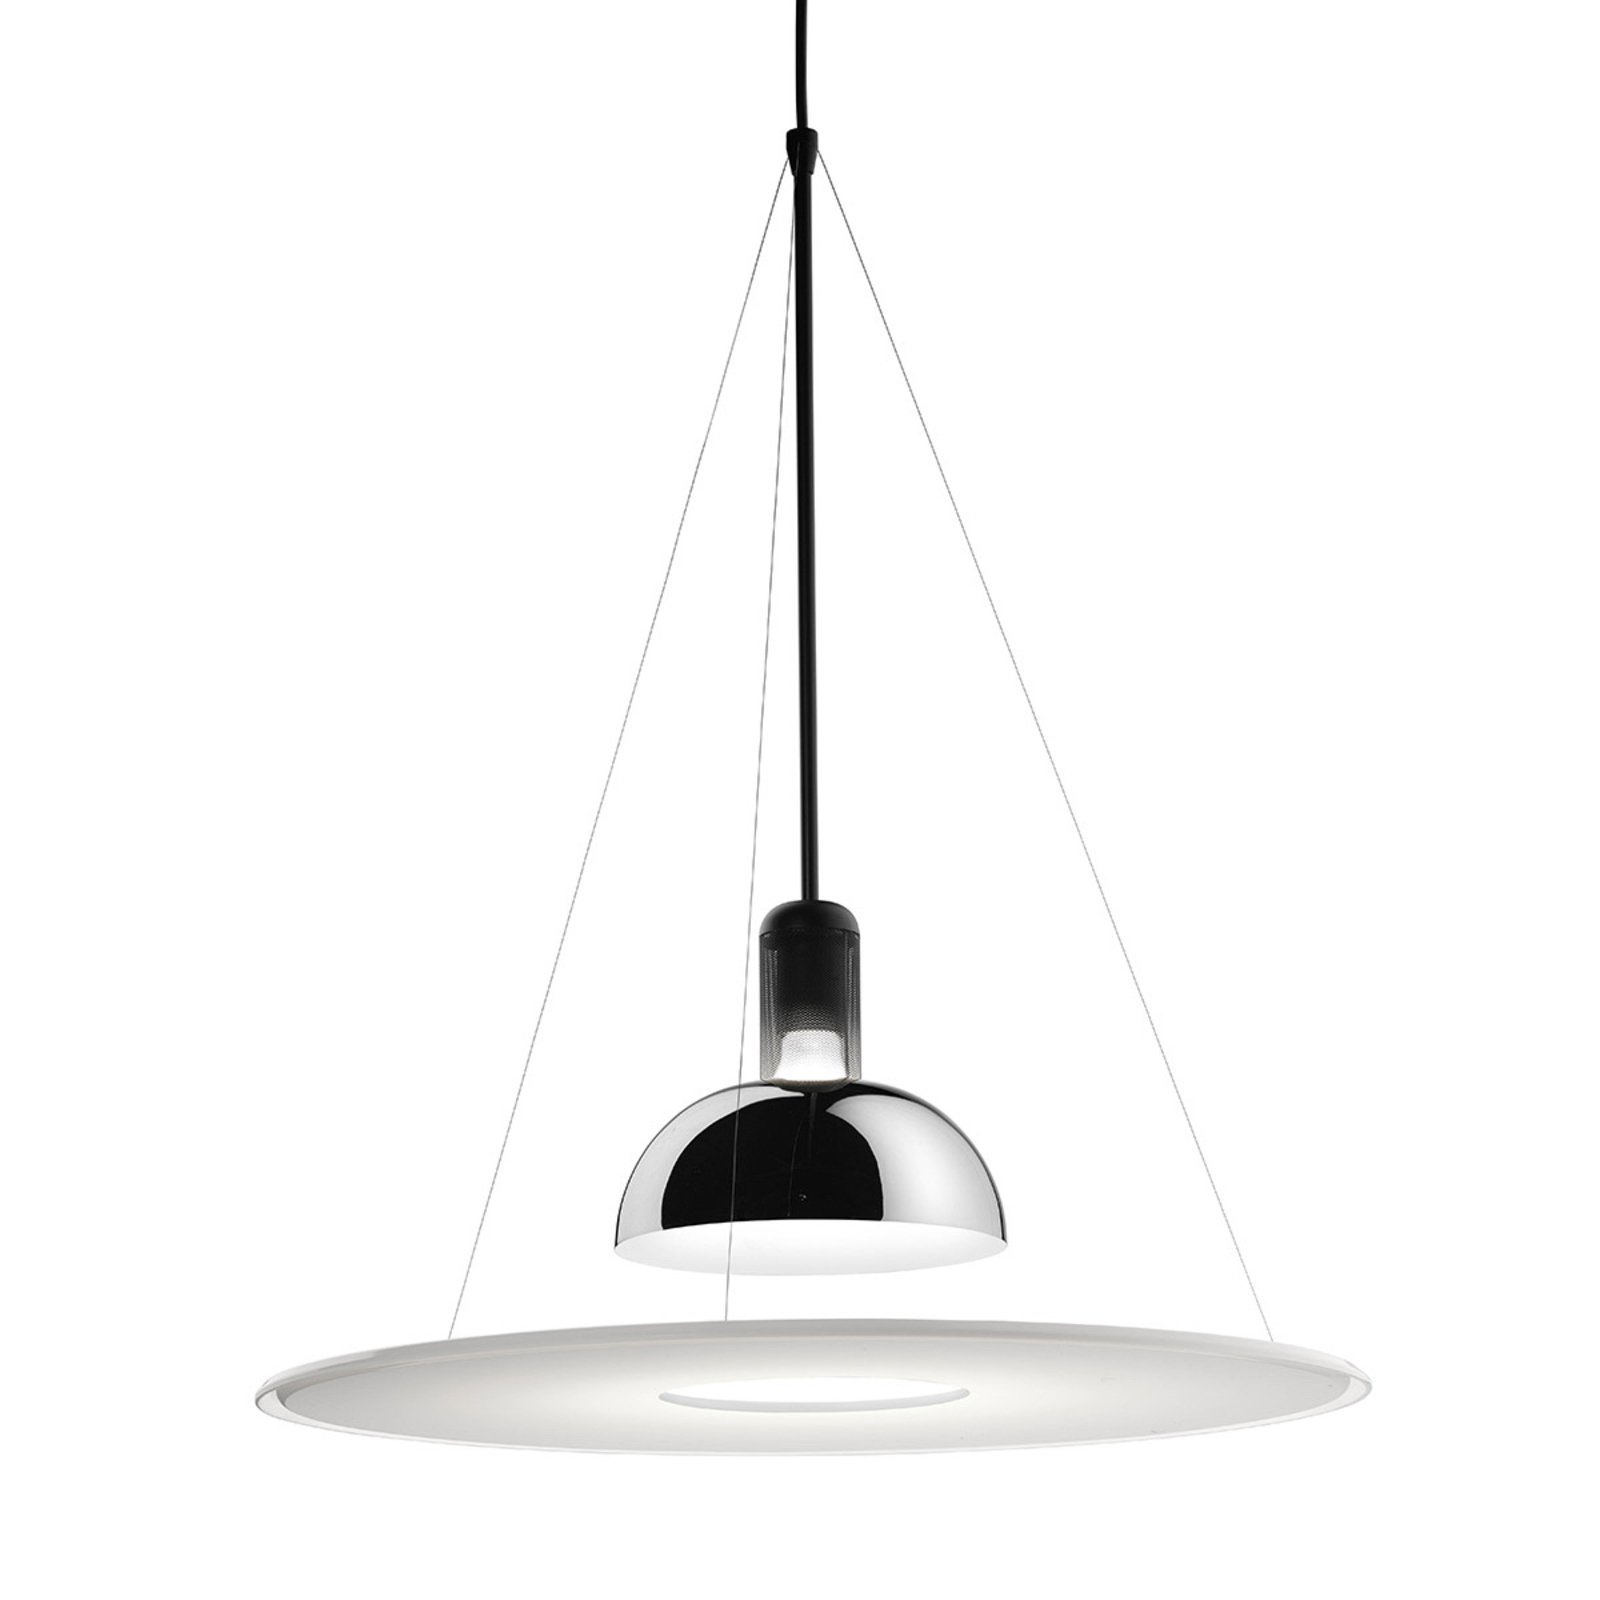 FLOS Frisbi hanging light with a white disc